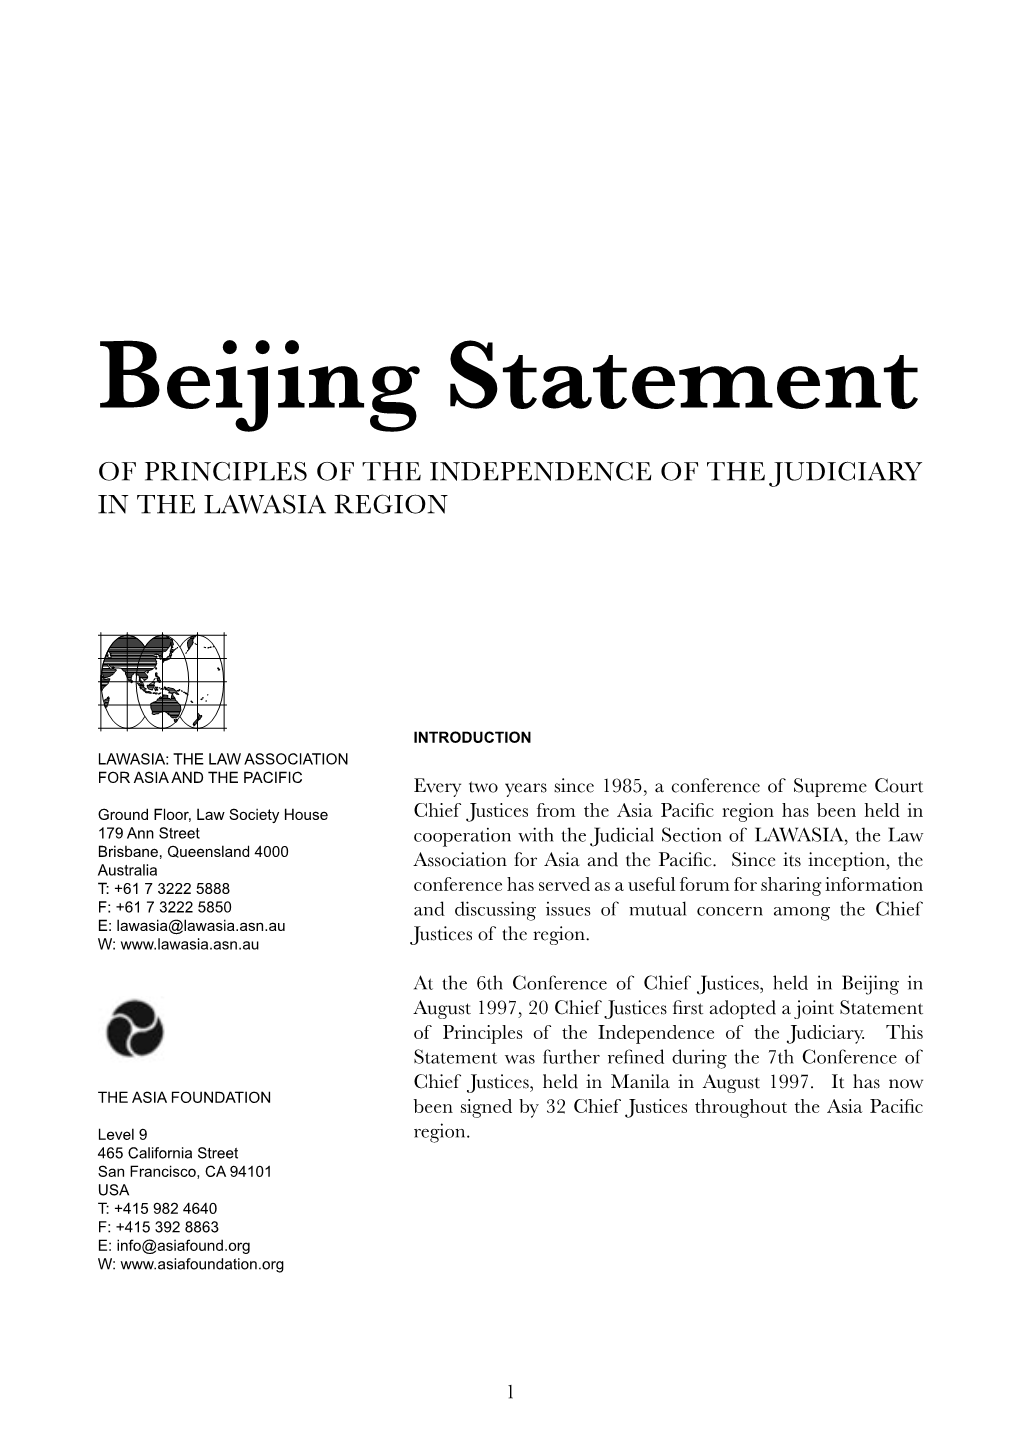 Beijing Statement of Principles of the Independence of the Judiciary